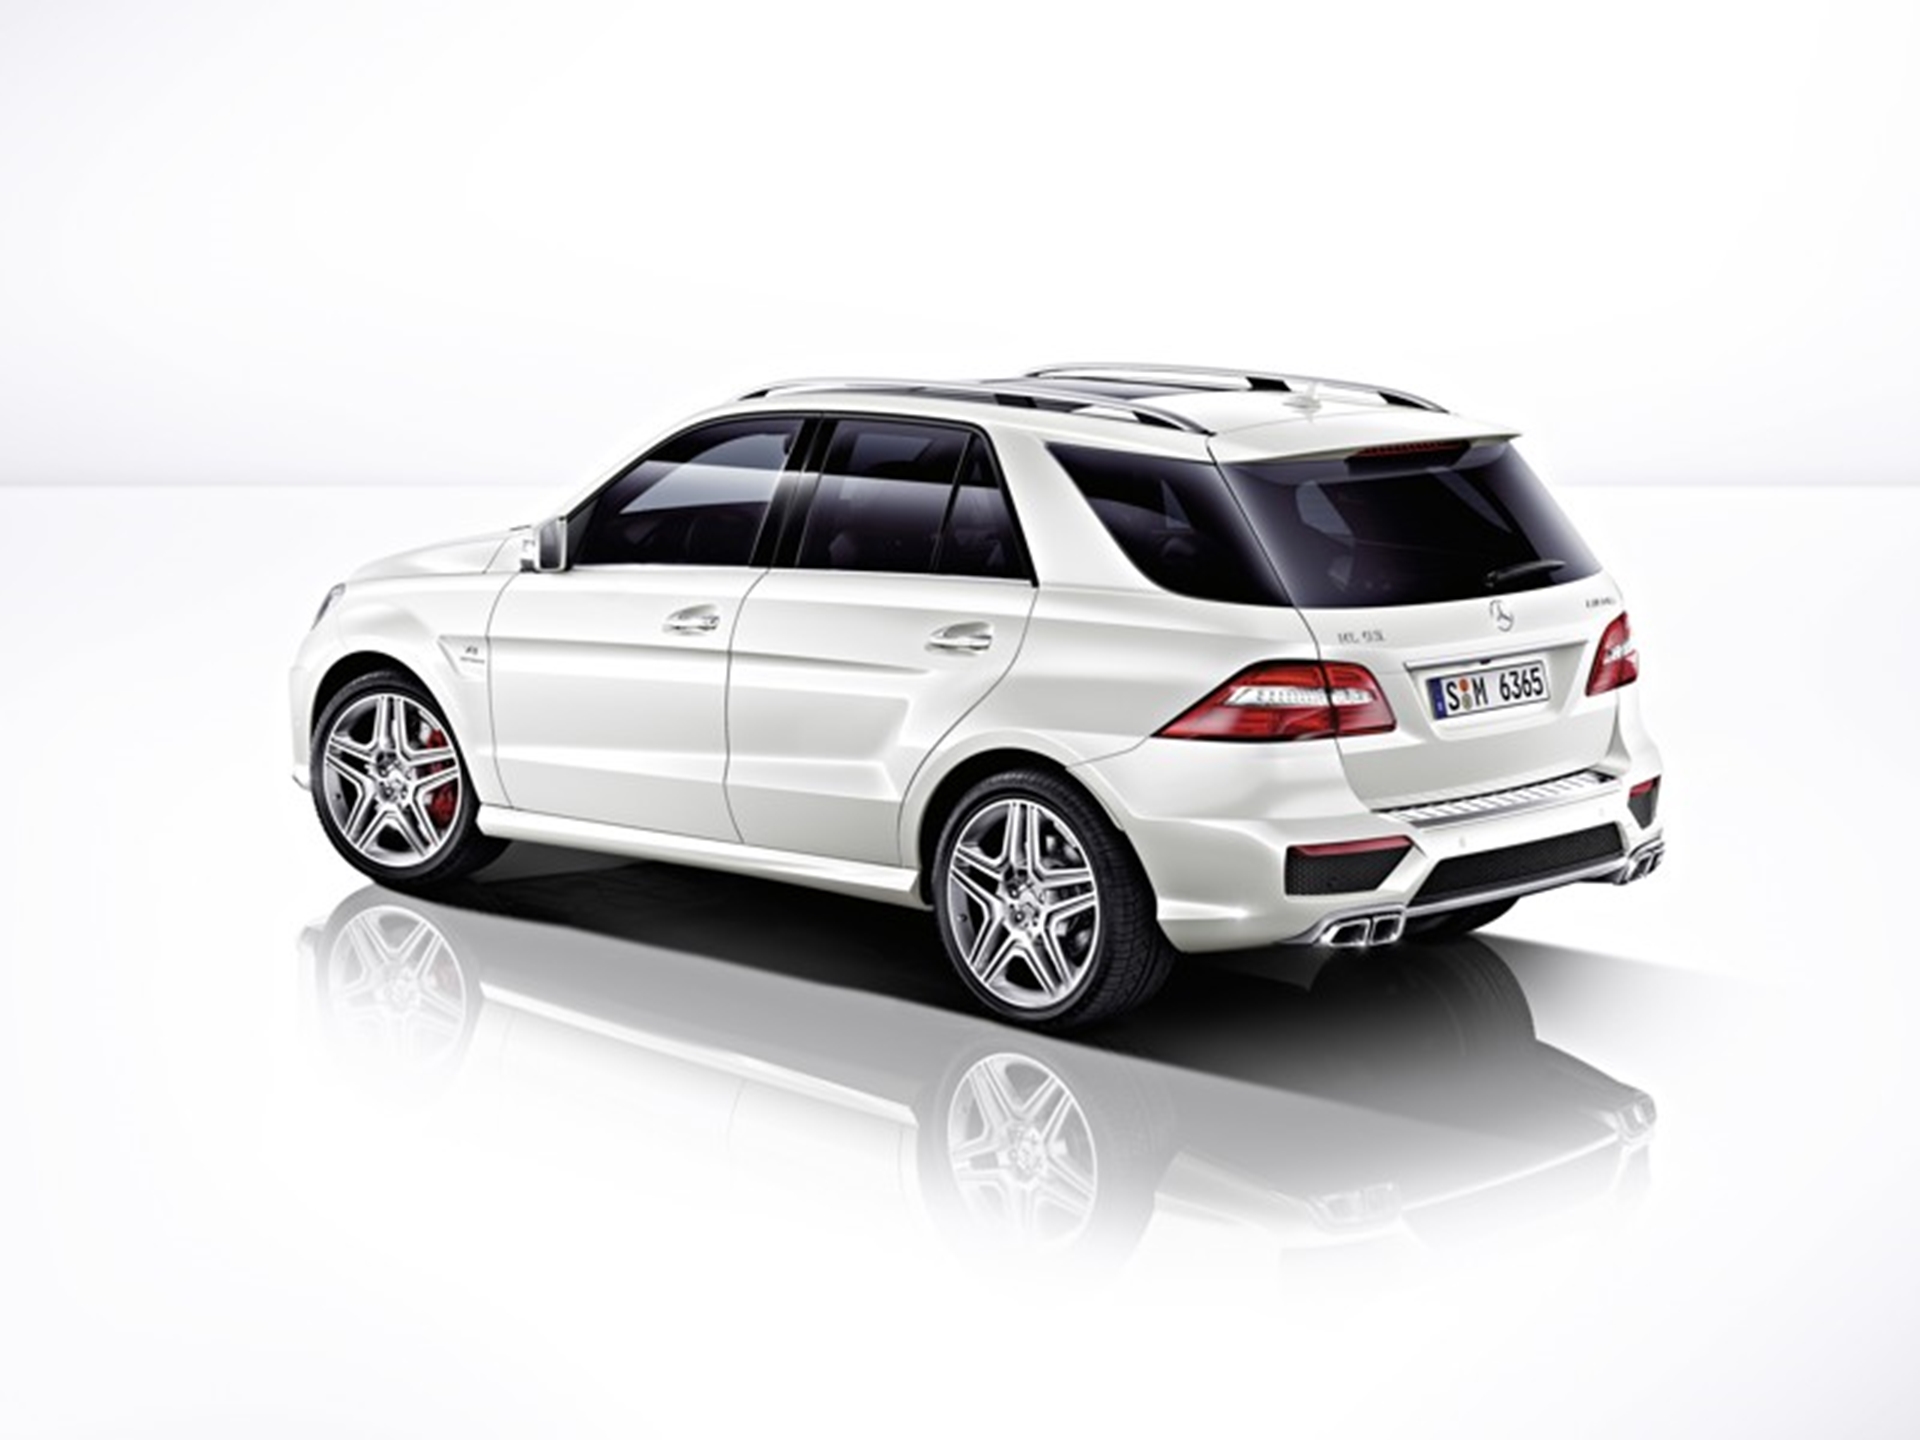 Mercedes-Benz ML 63 AMG: Efficiency and superlative performance